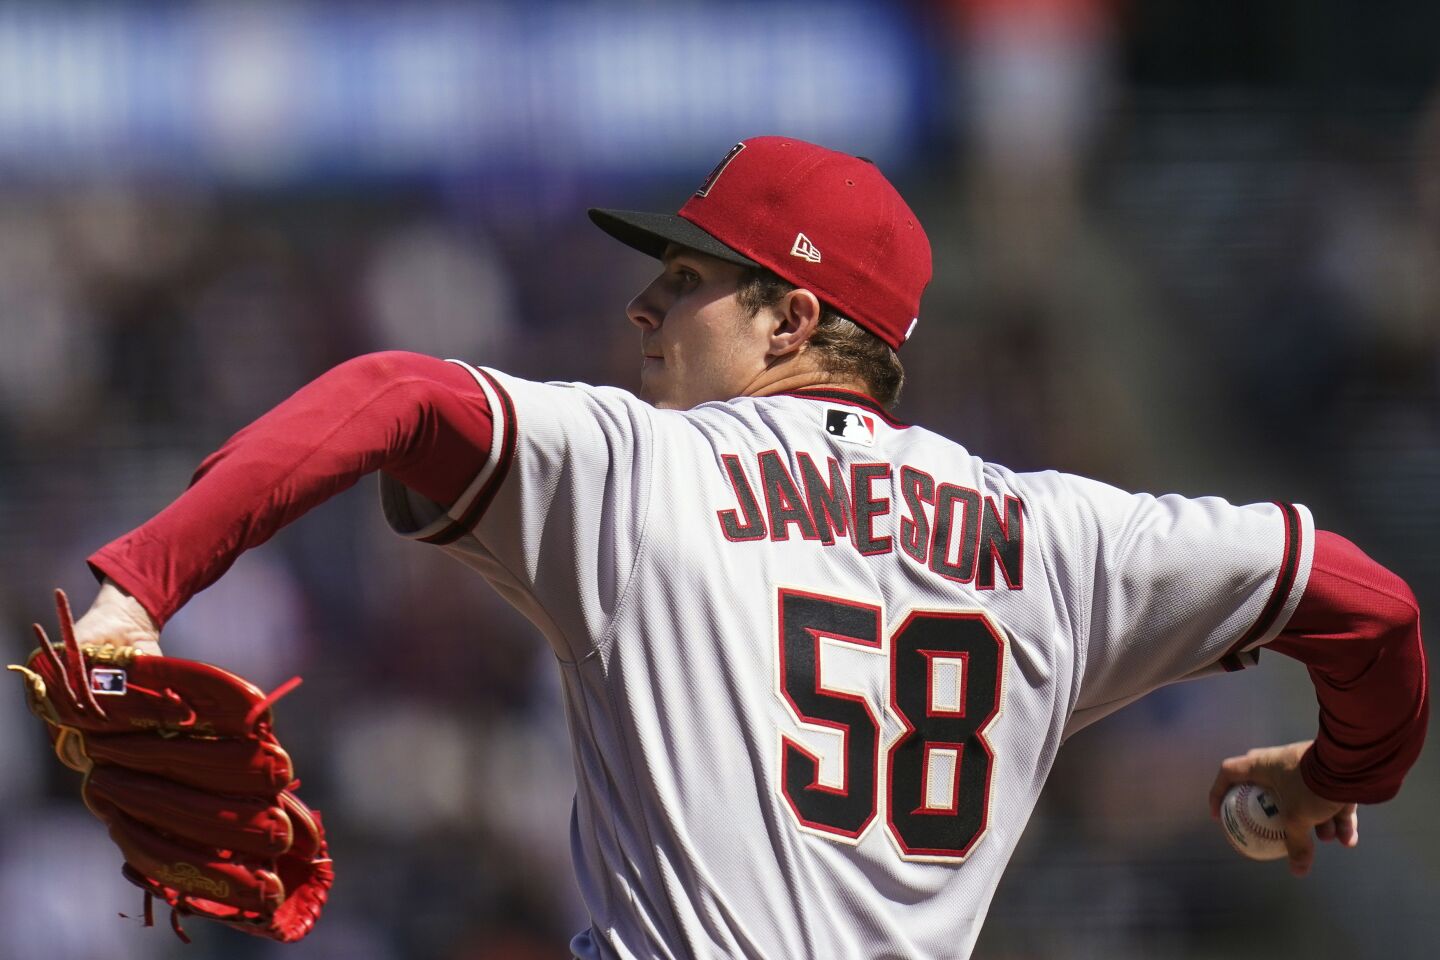 21 | Arizona Diamondbacks (73-86; LW: 19)Good start: Rookie Drey Jameson, who baffled the Padres in his debut, is 3-0 with a 1.48 ERA, 24 strikeouts and a 1.11 WHIP through the first four starts of his career.